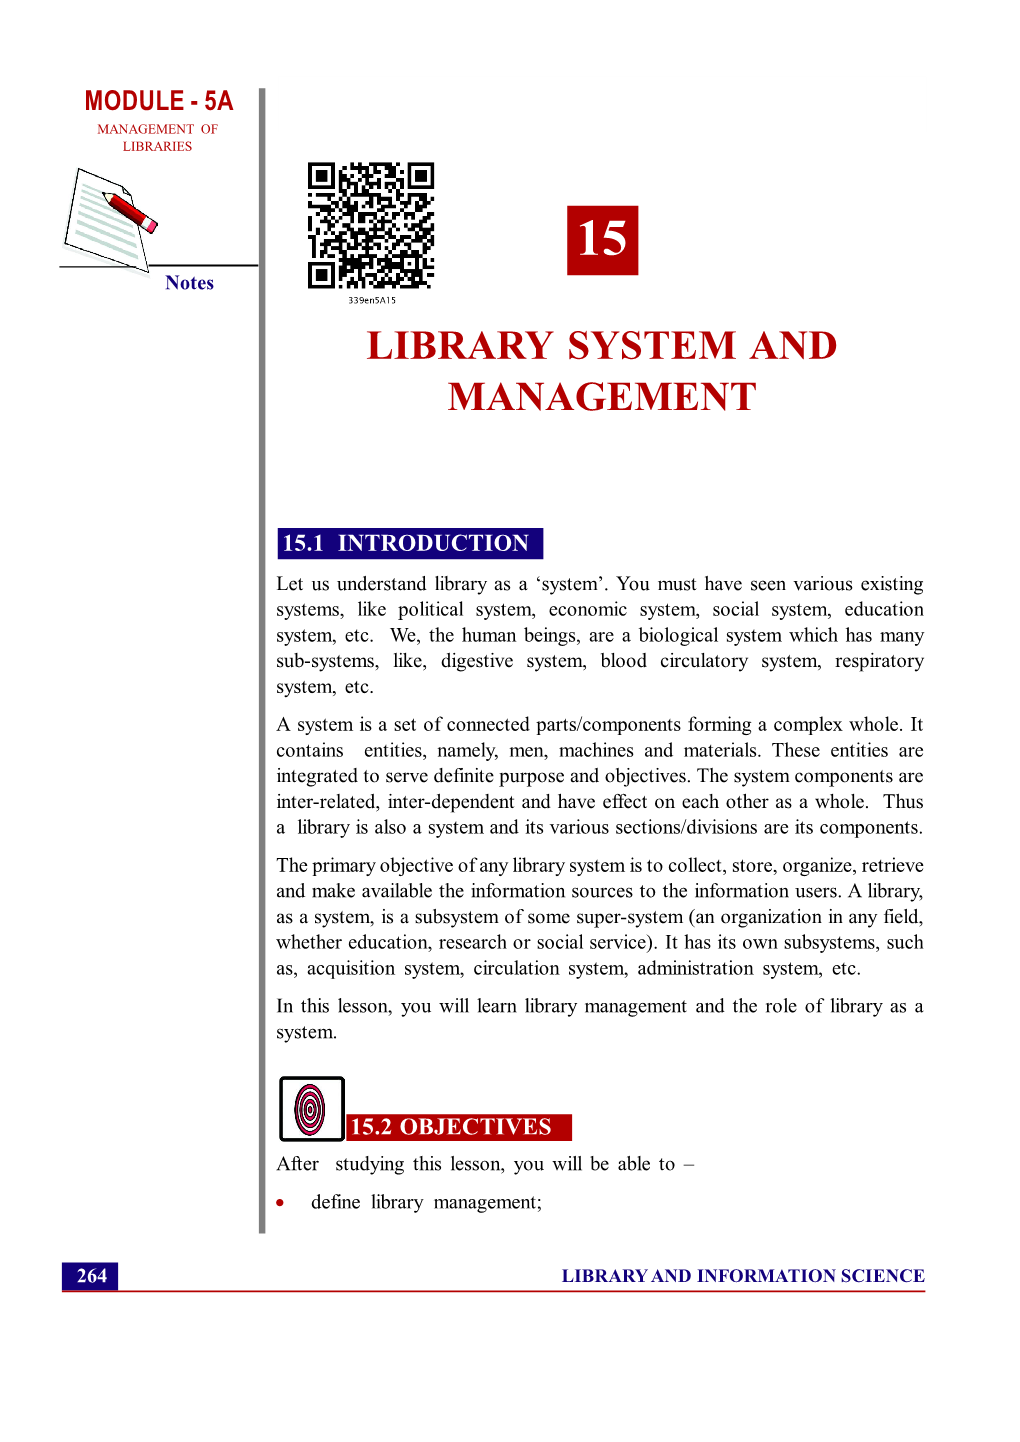 Library System and Management MANAGEMENT of LIBRARIES